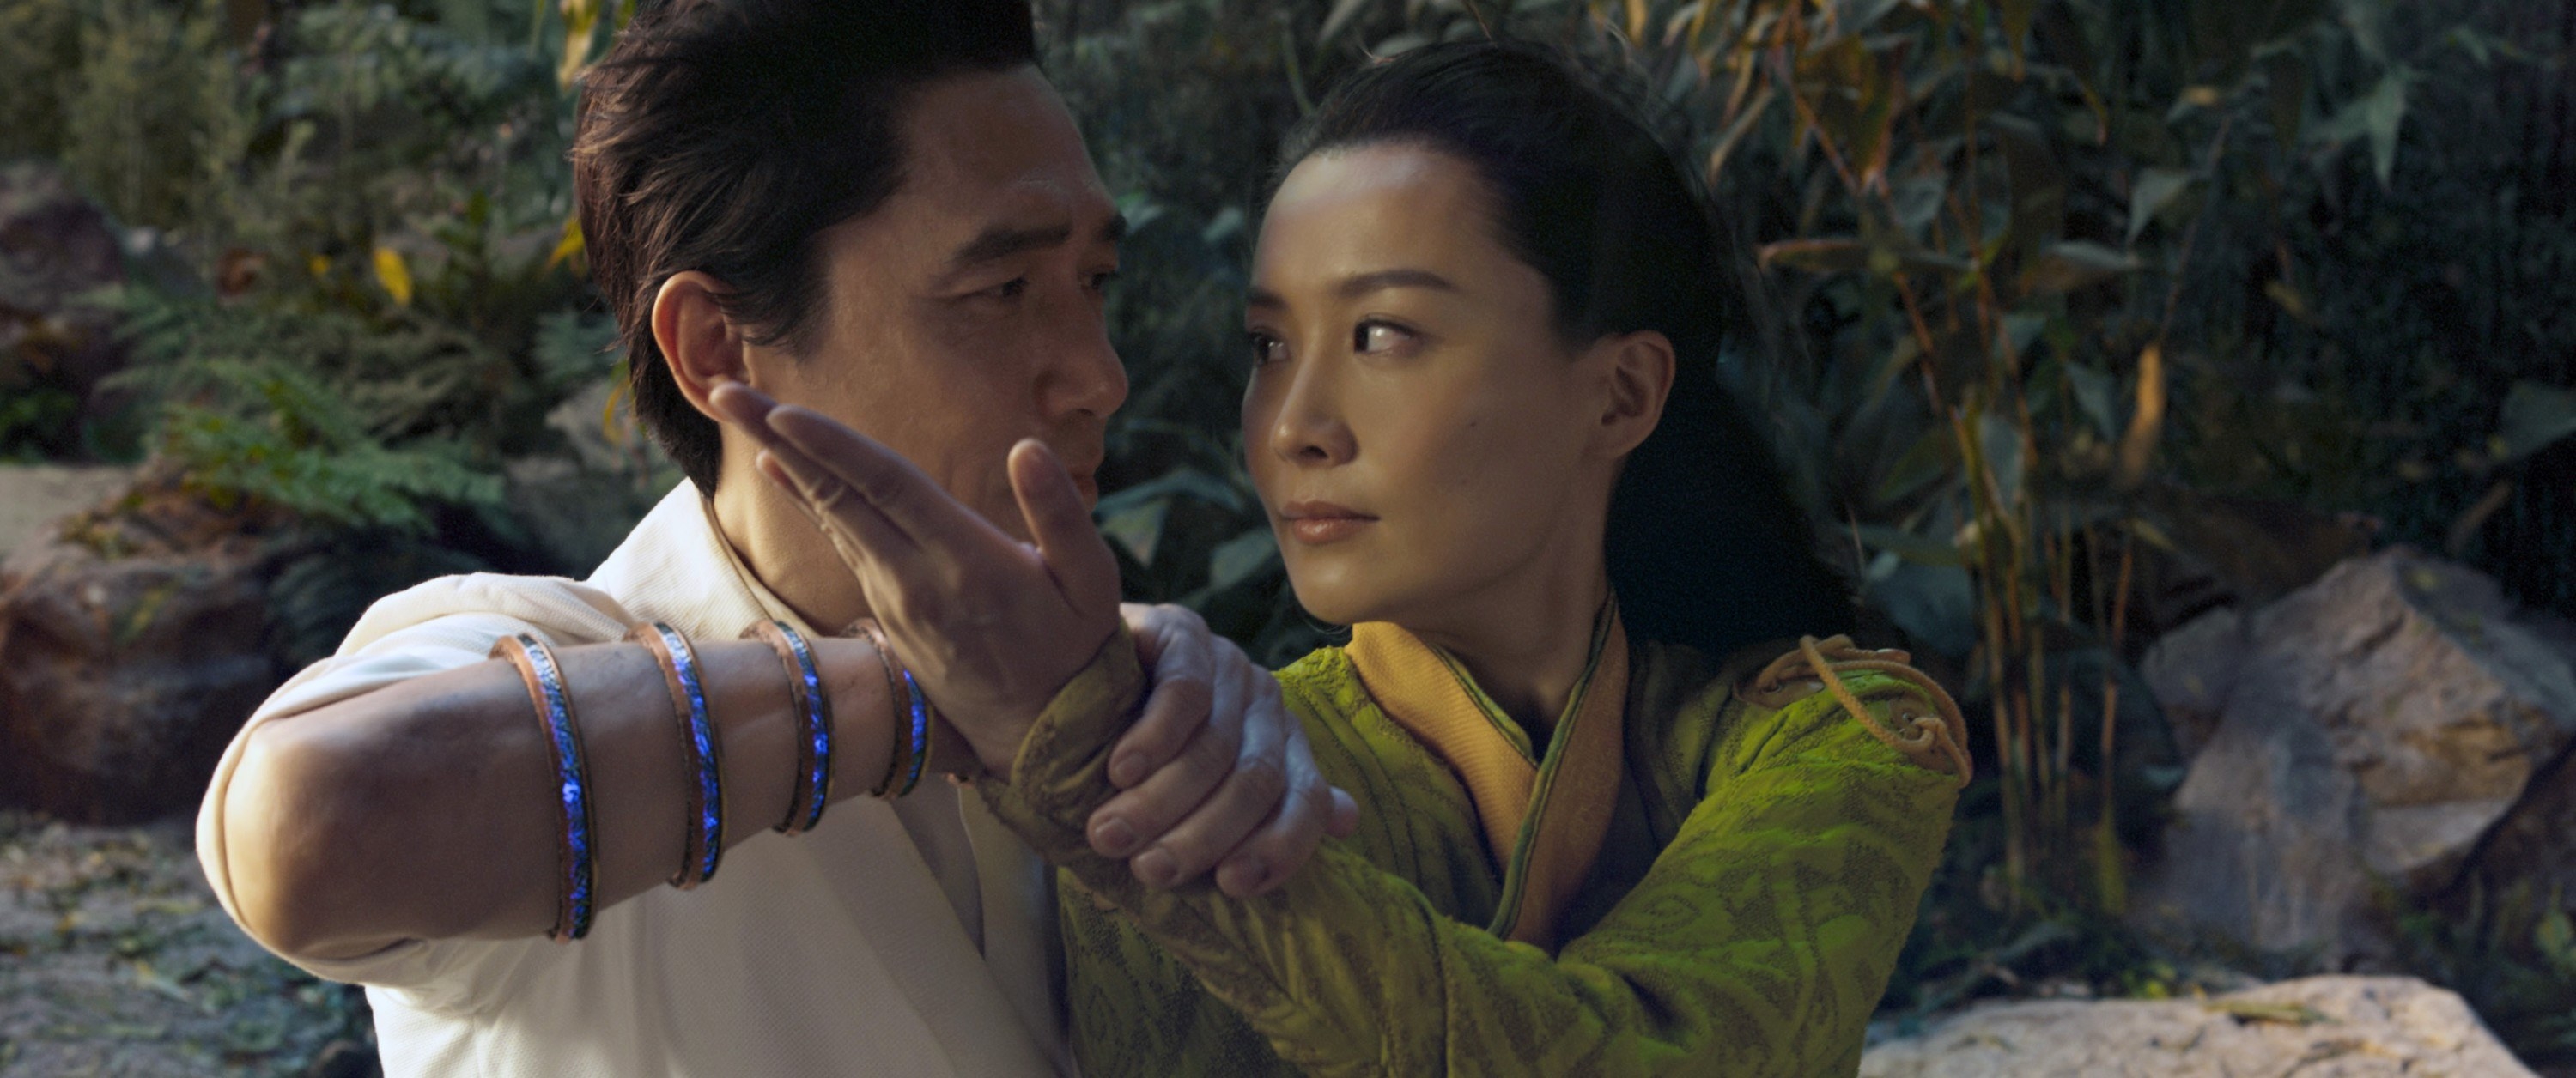 Tony Leung and Fala Chen dance battling during their first meeting